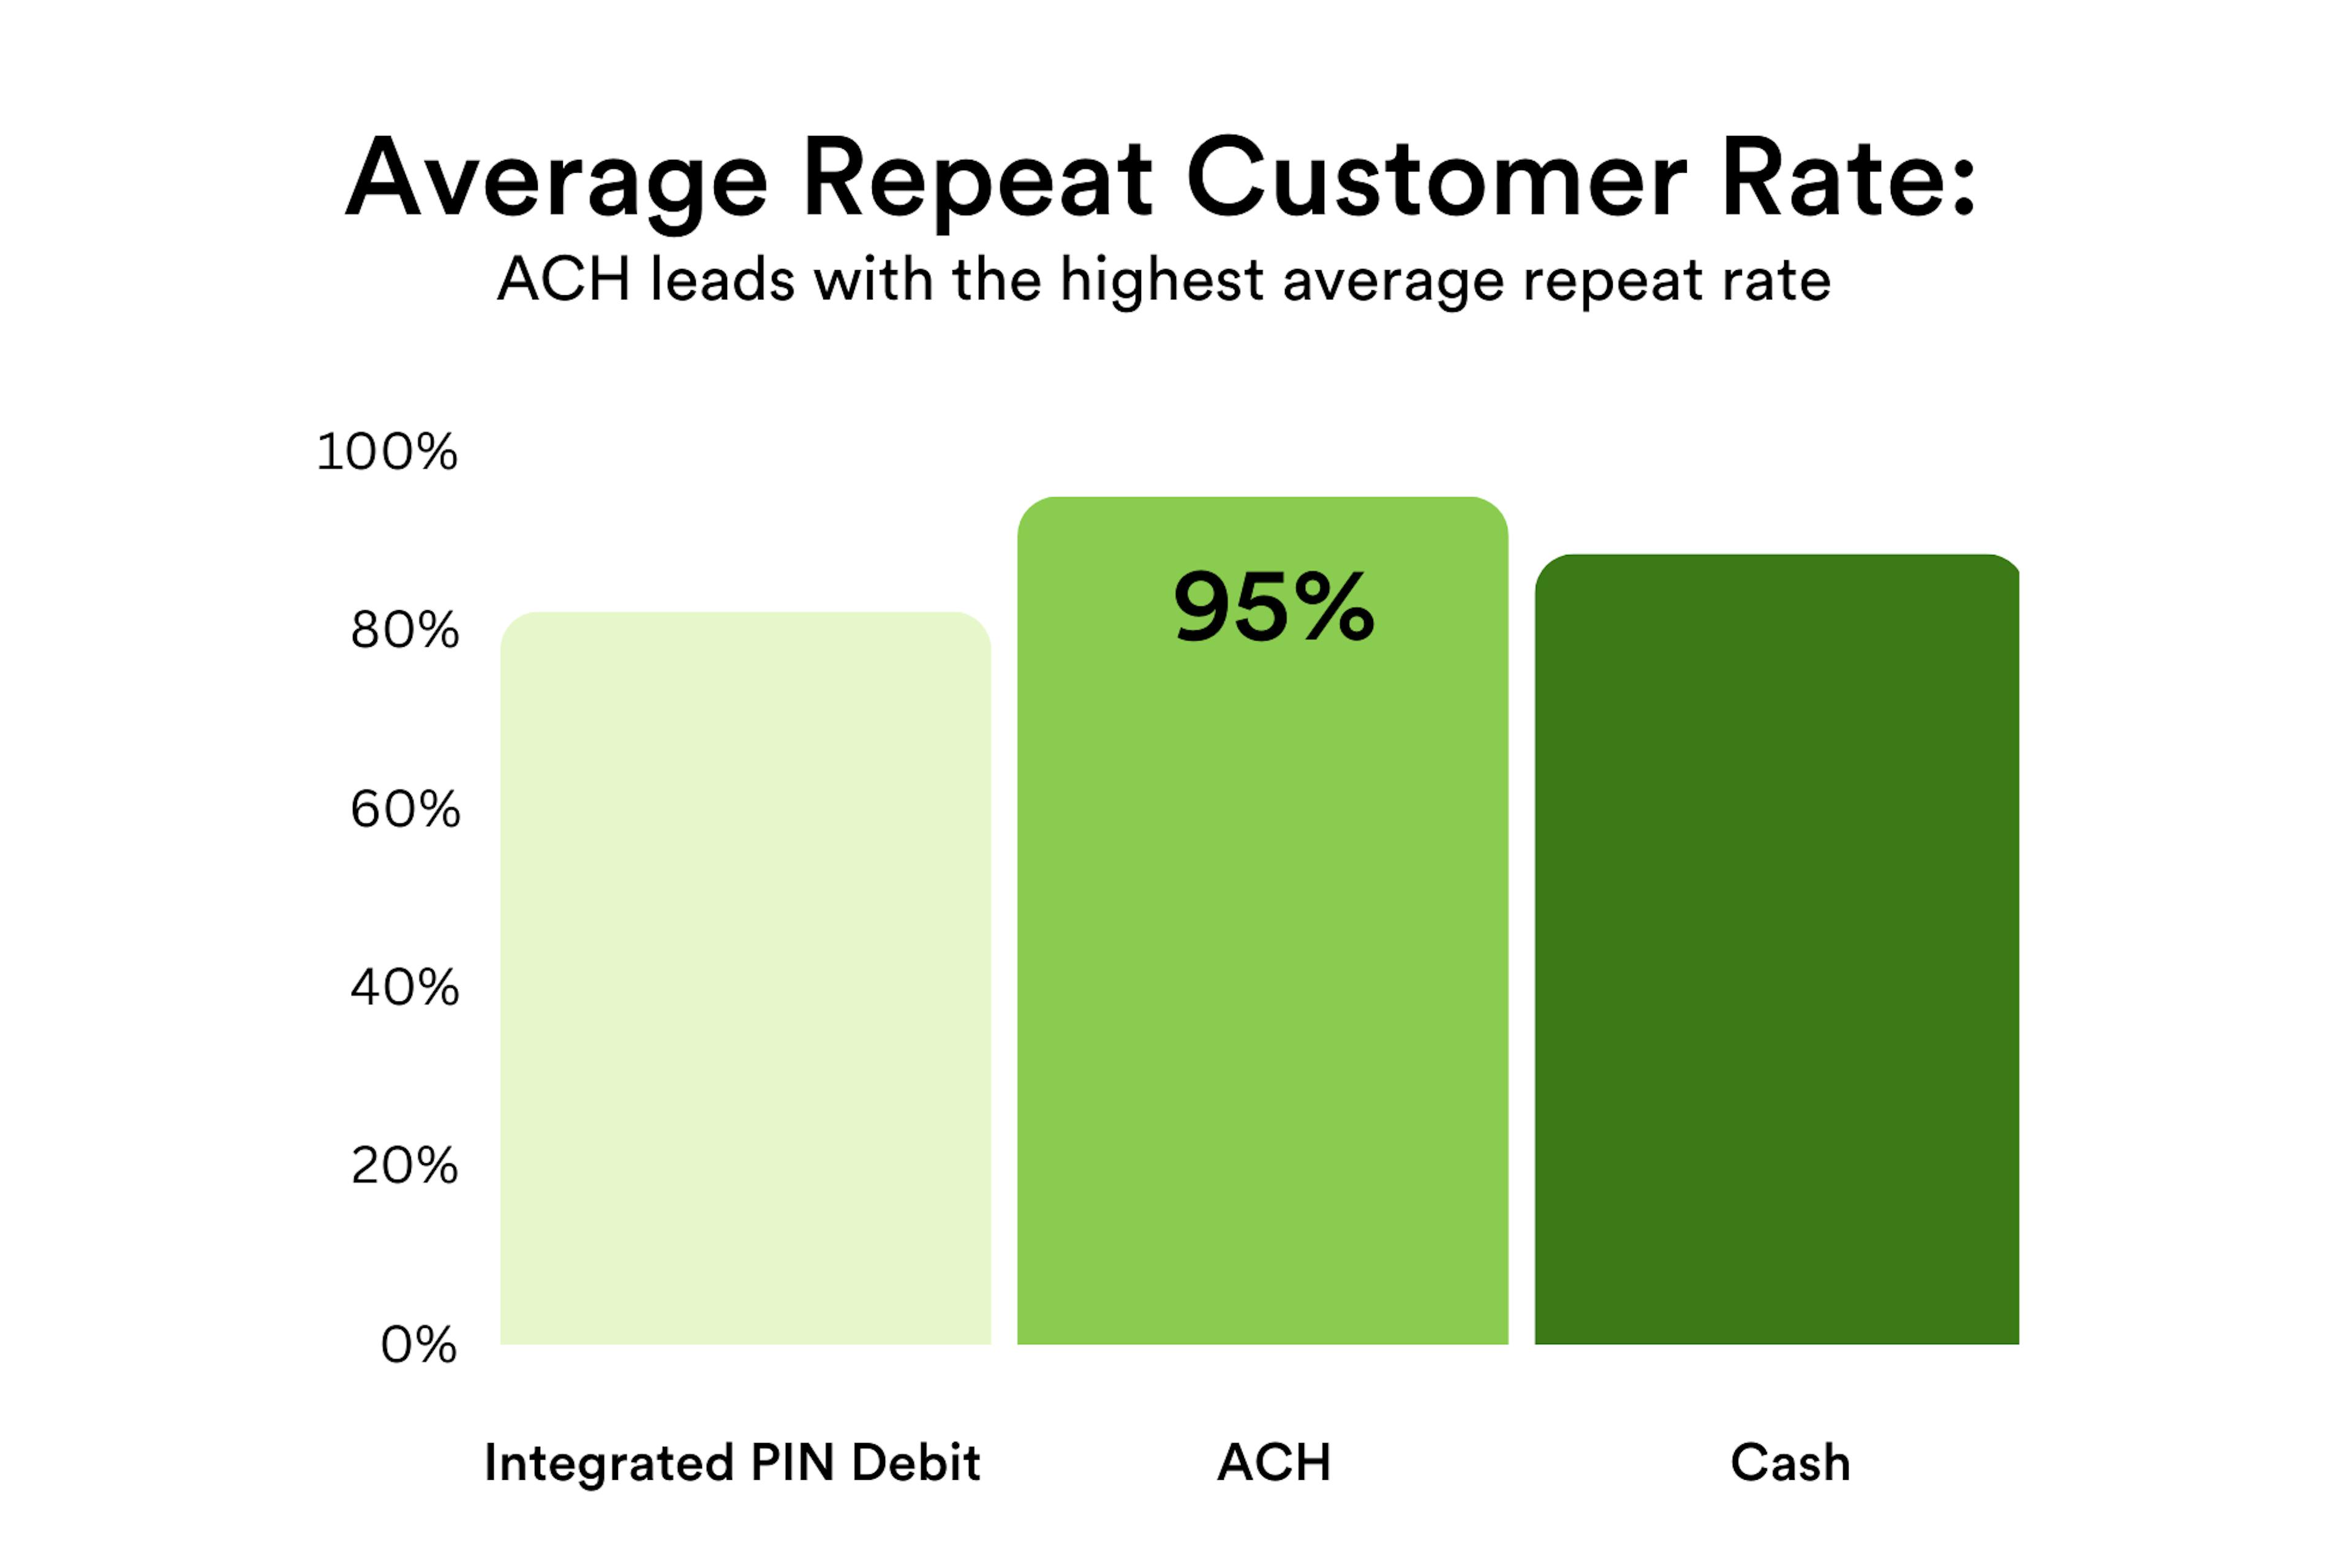 The image is a bar chart titled "Average Repeat Customer Rate," showing a comparison of customer repeat rates for different payment methods. The bars represent the following payment options:  "Integrated PIN Debit" with a repeat rate below 60%. "ACH" with the highest repeat rate at 95%. "Cash" with a repeat rate slightly below the rate for ACH, around 90%. The chart emphasizes that ACH payments lead to the highest average repeat customer rate among the payment methods presented. The bars are colored in varying shades of green, and the percentages are displayed prominently at the top of each bar.